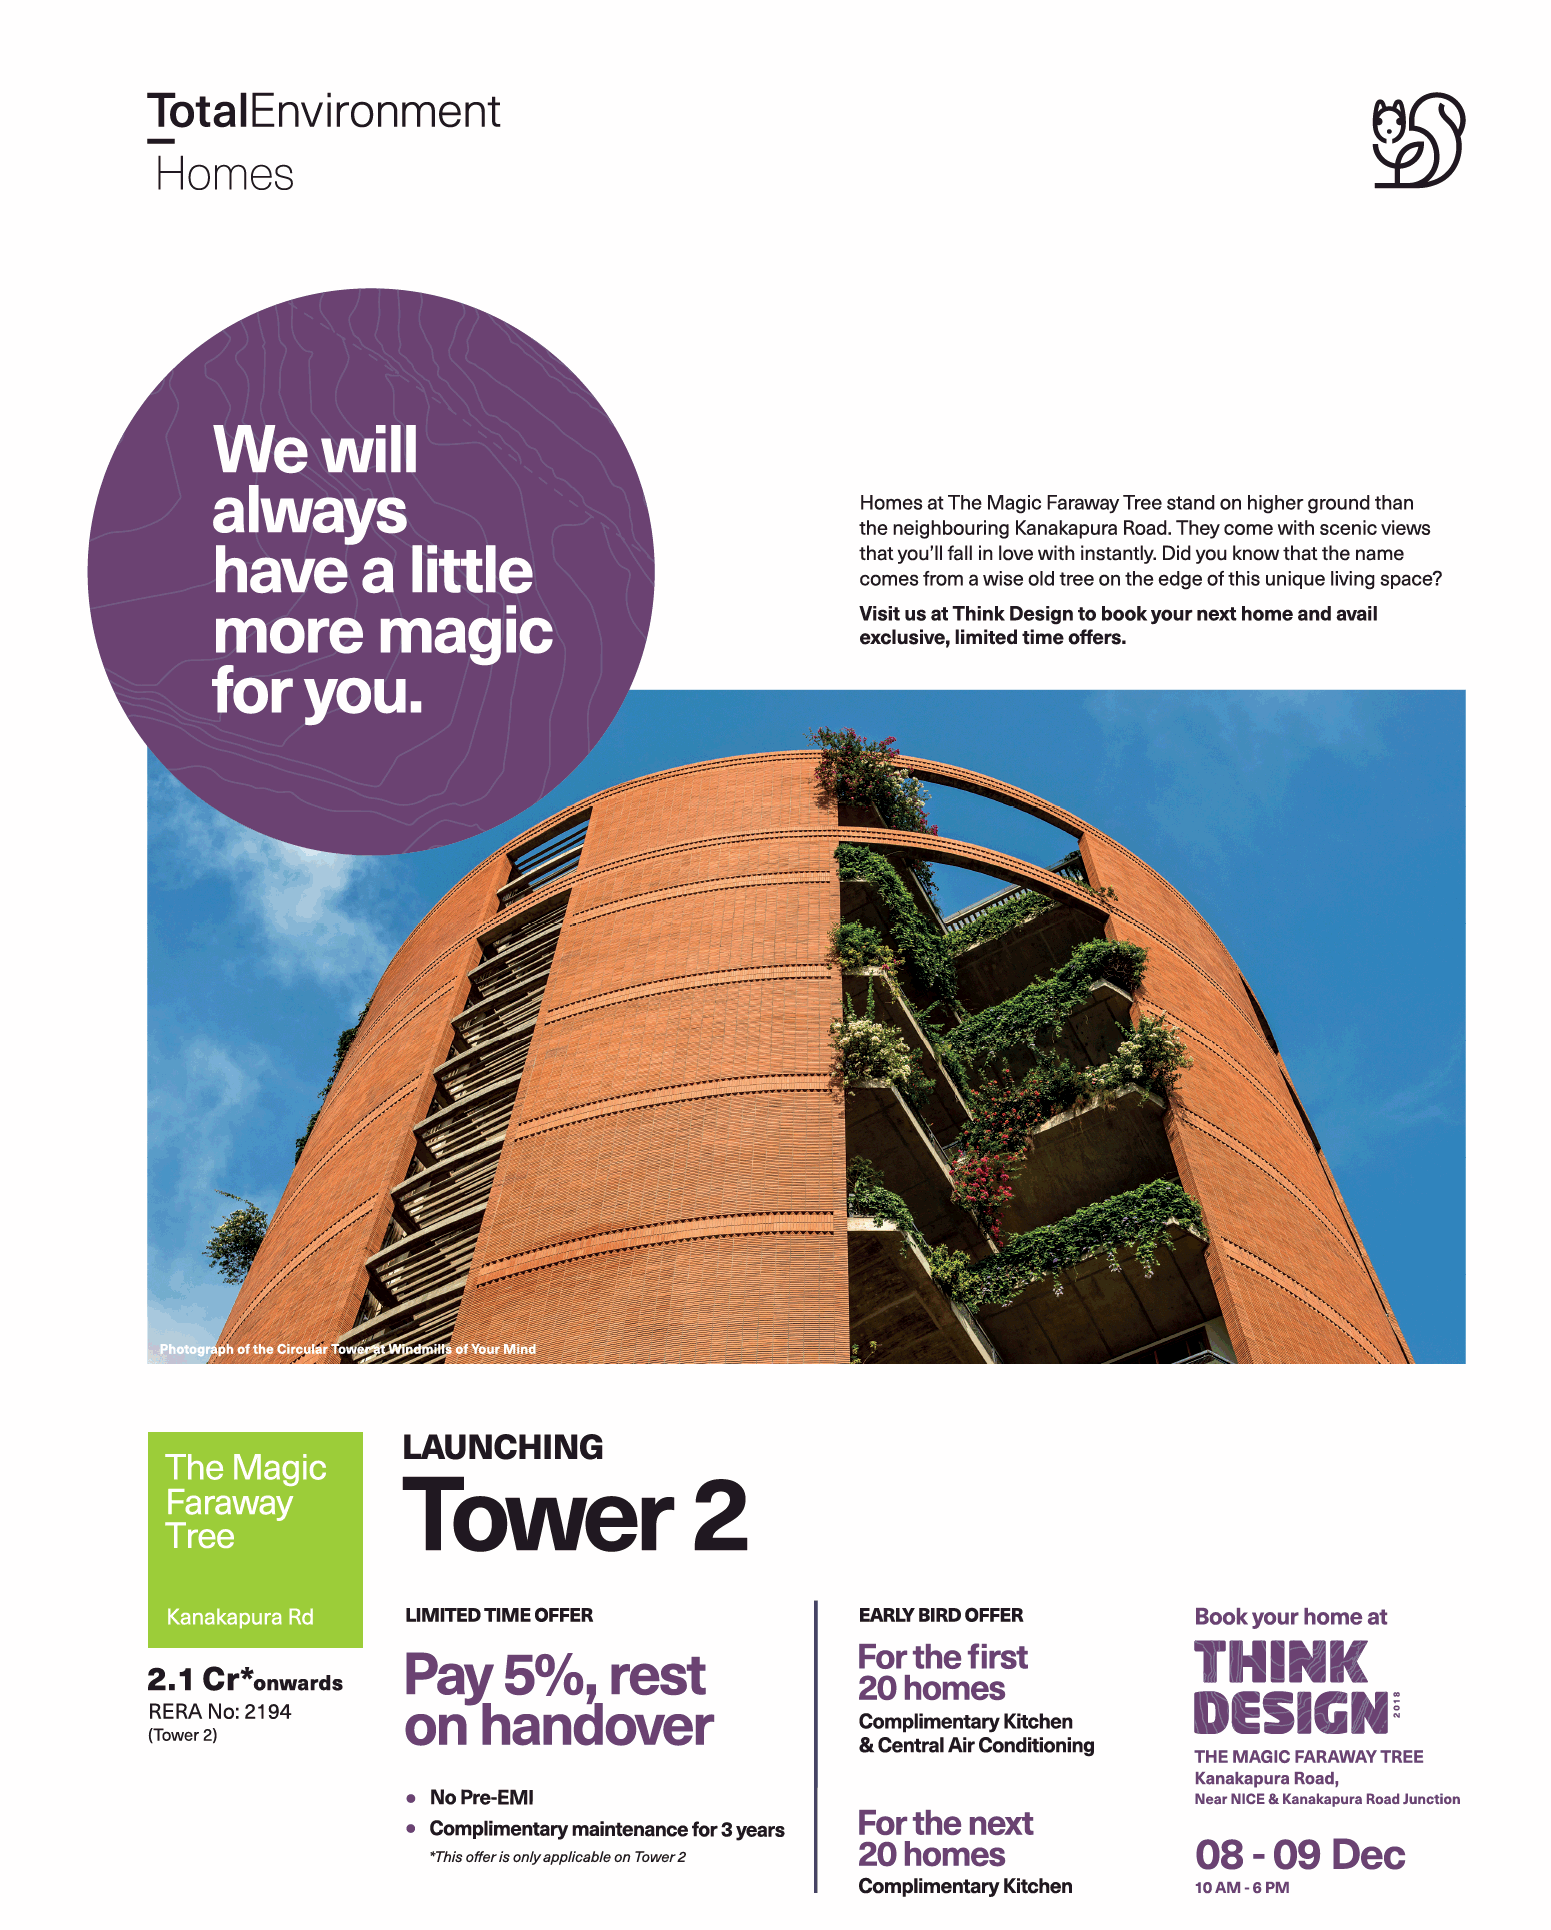 Total Environment launching tower 2 at The Magic Faraway Tree in Bangalore Update